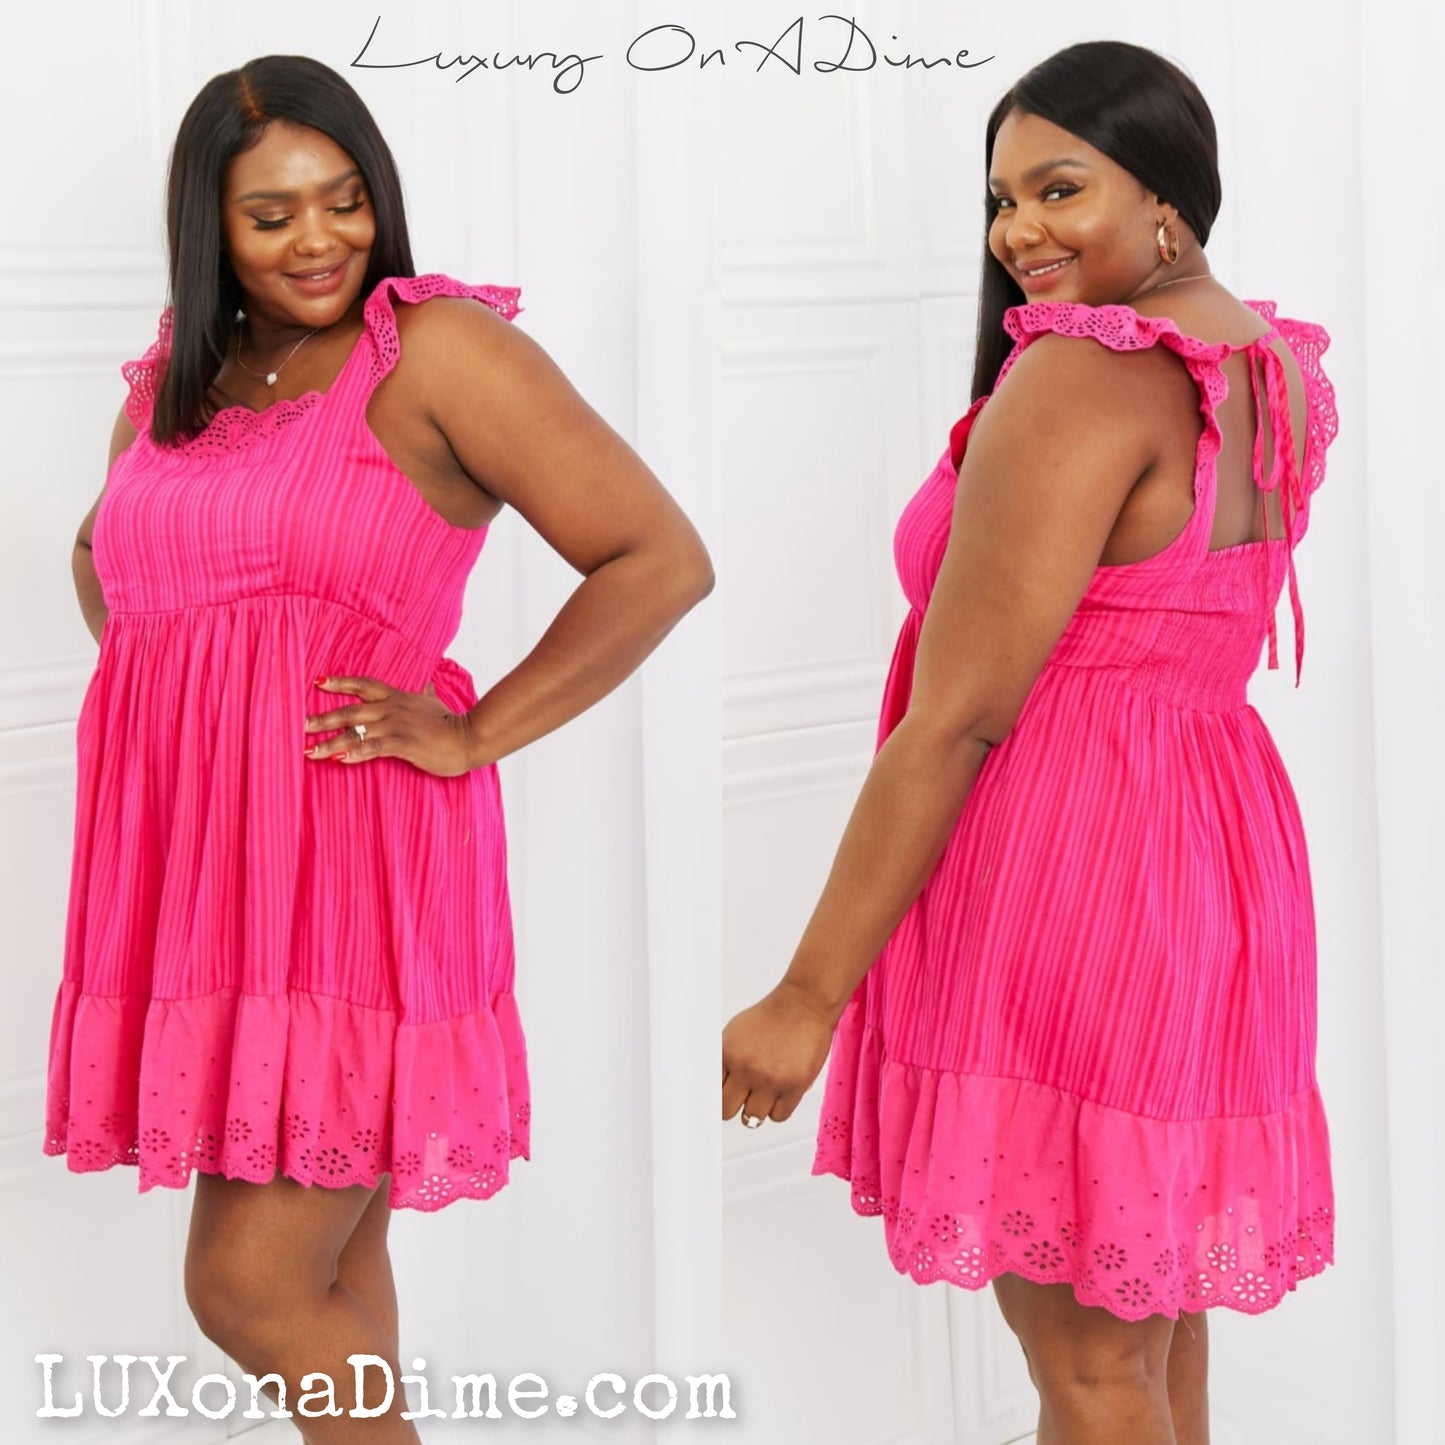 Neon Hot Pink Baby Doll Lace Ruffle Mini Dress (Plus Size Available)